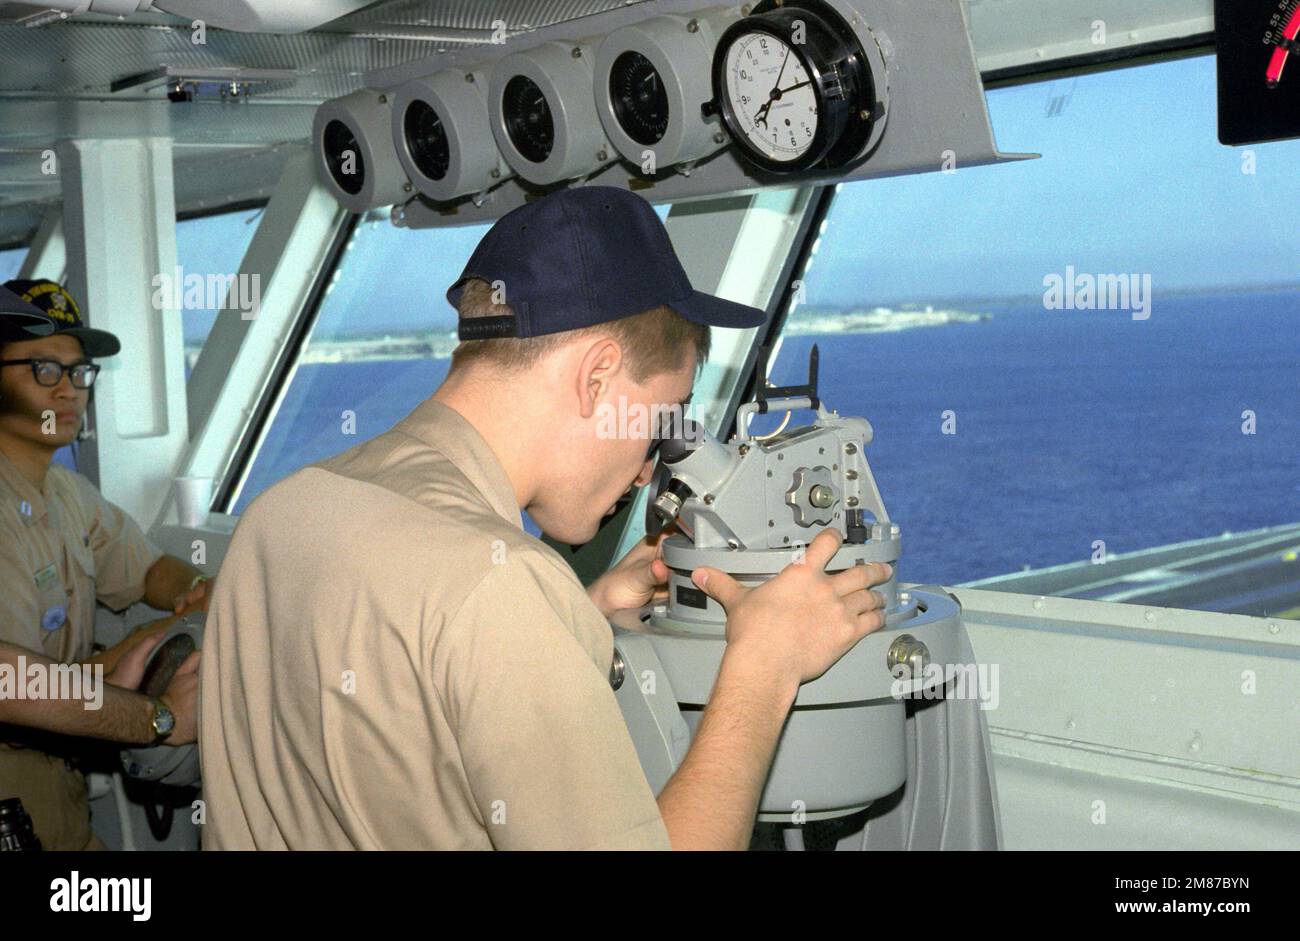 A sailor uses a telescopic alidade to take a bearing from the bridge of the nuclear-powered aircraft carrier USS THEODORE ROOSEVELT (CVN-71). Country: Unknown Stock Photo